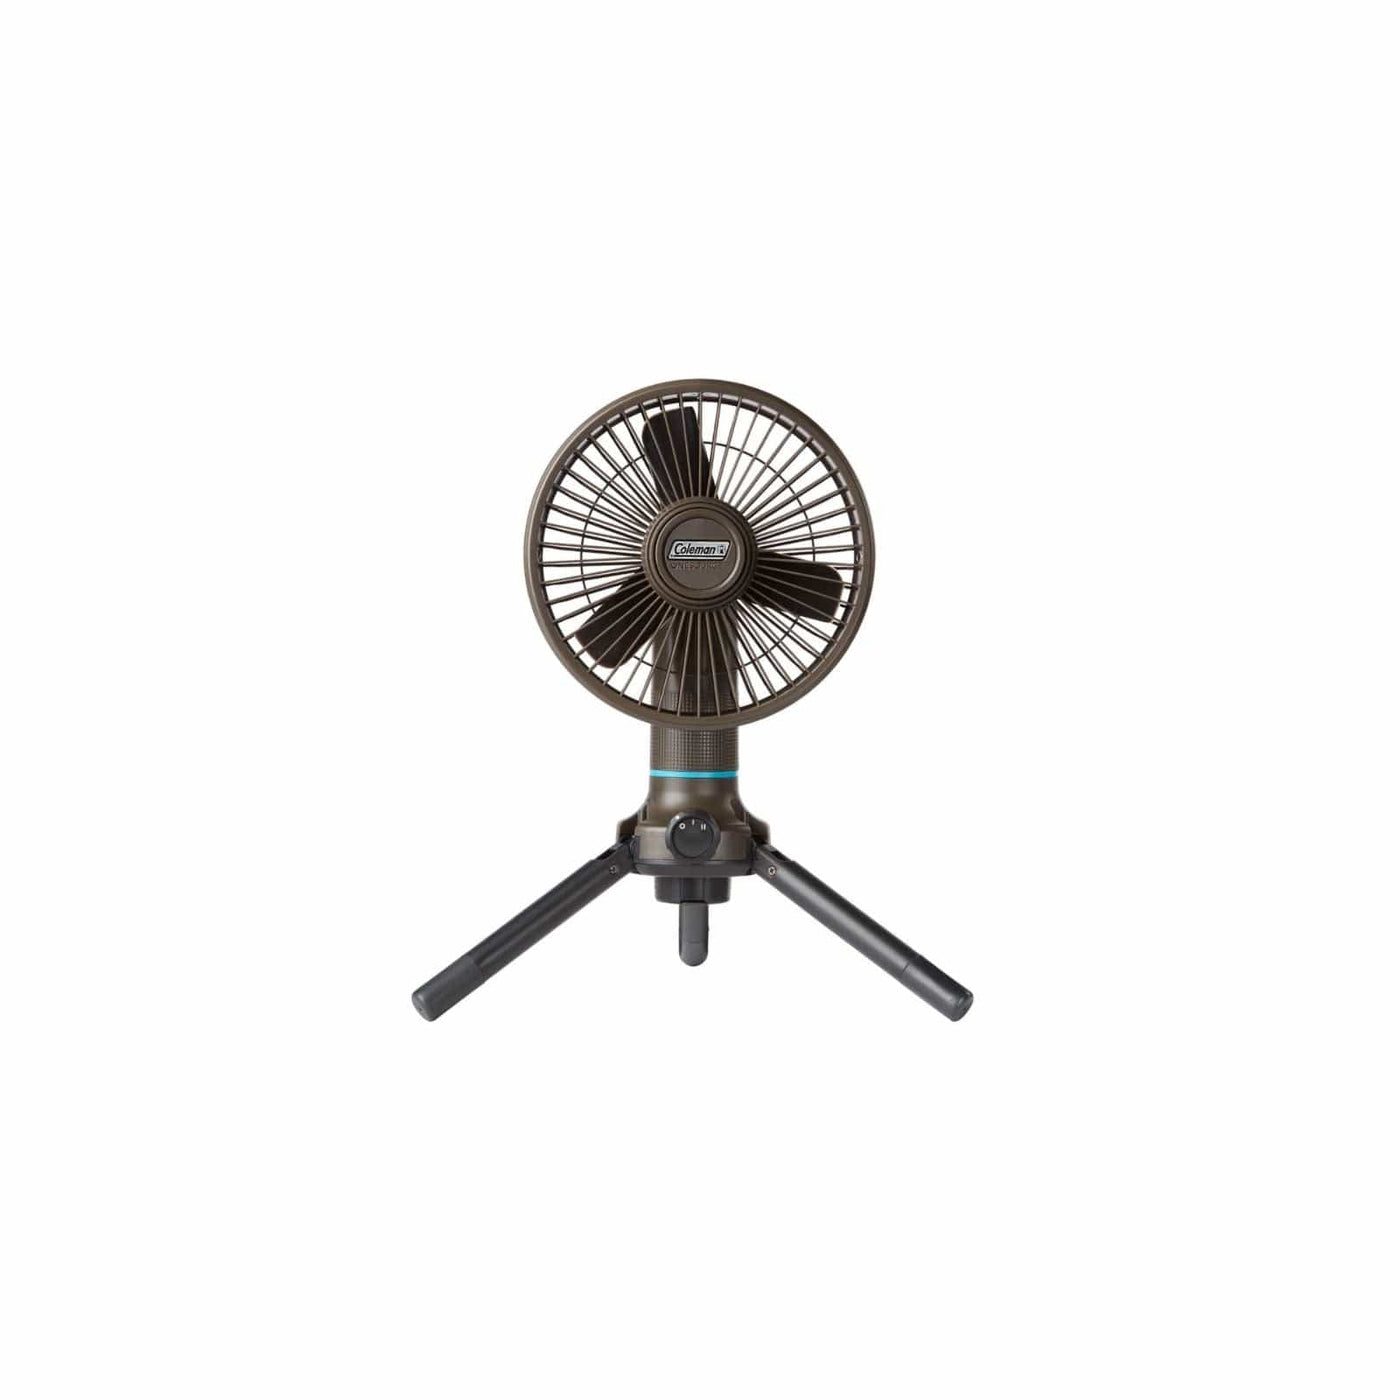 Coleman Coleman Fan Portable Onesource C002 Camping And Outdoor